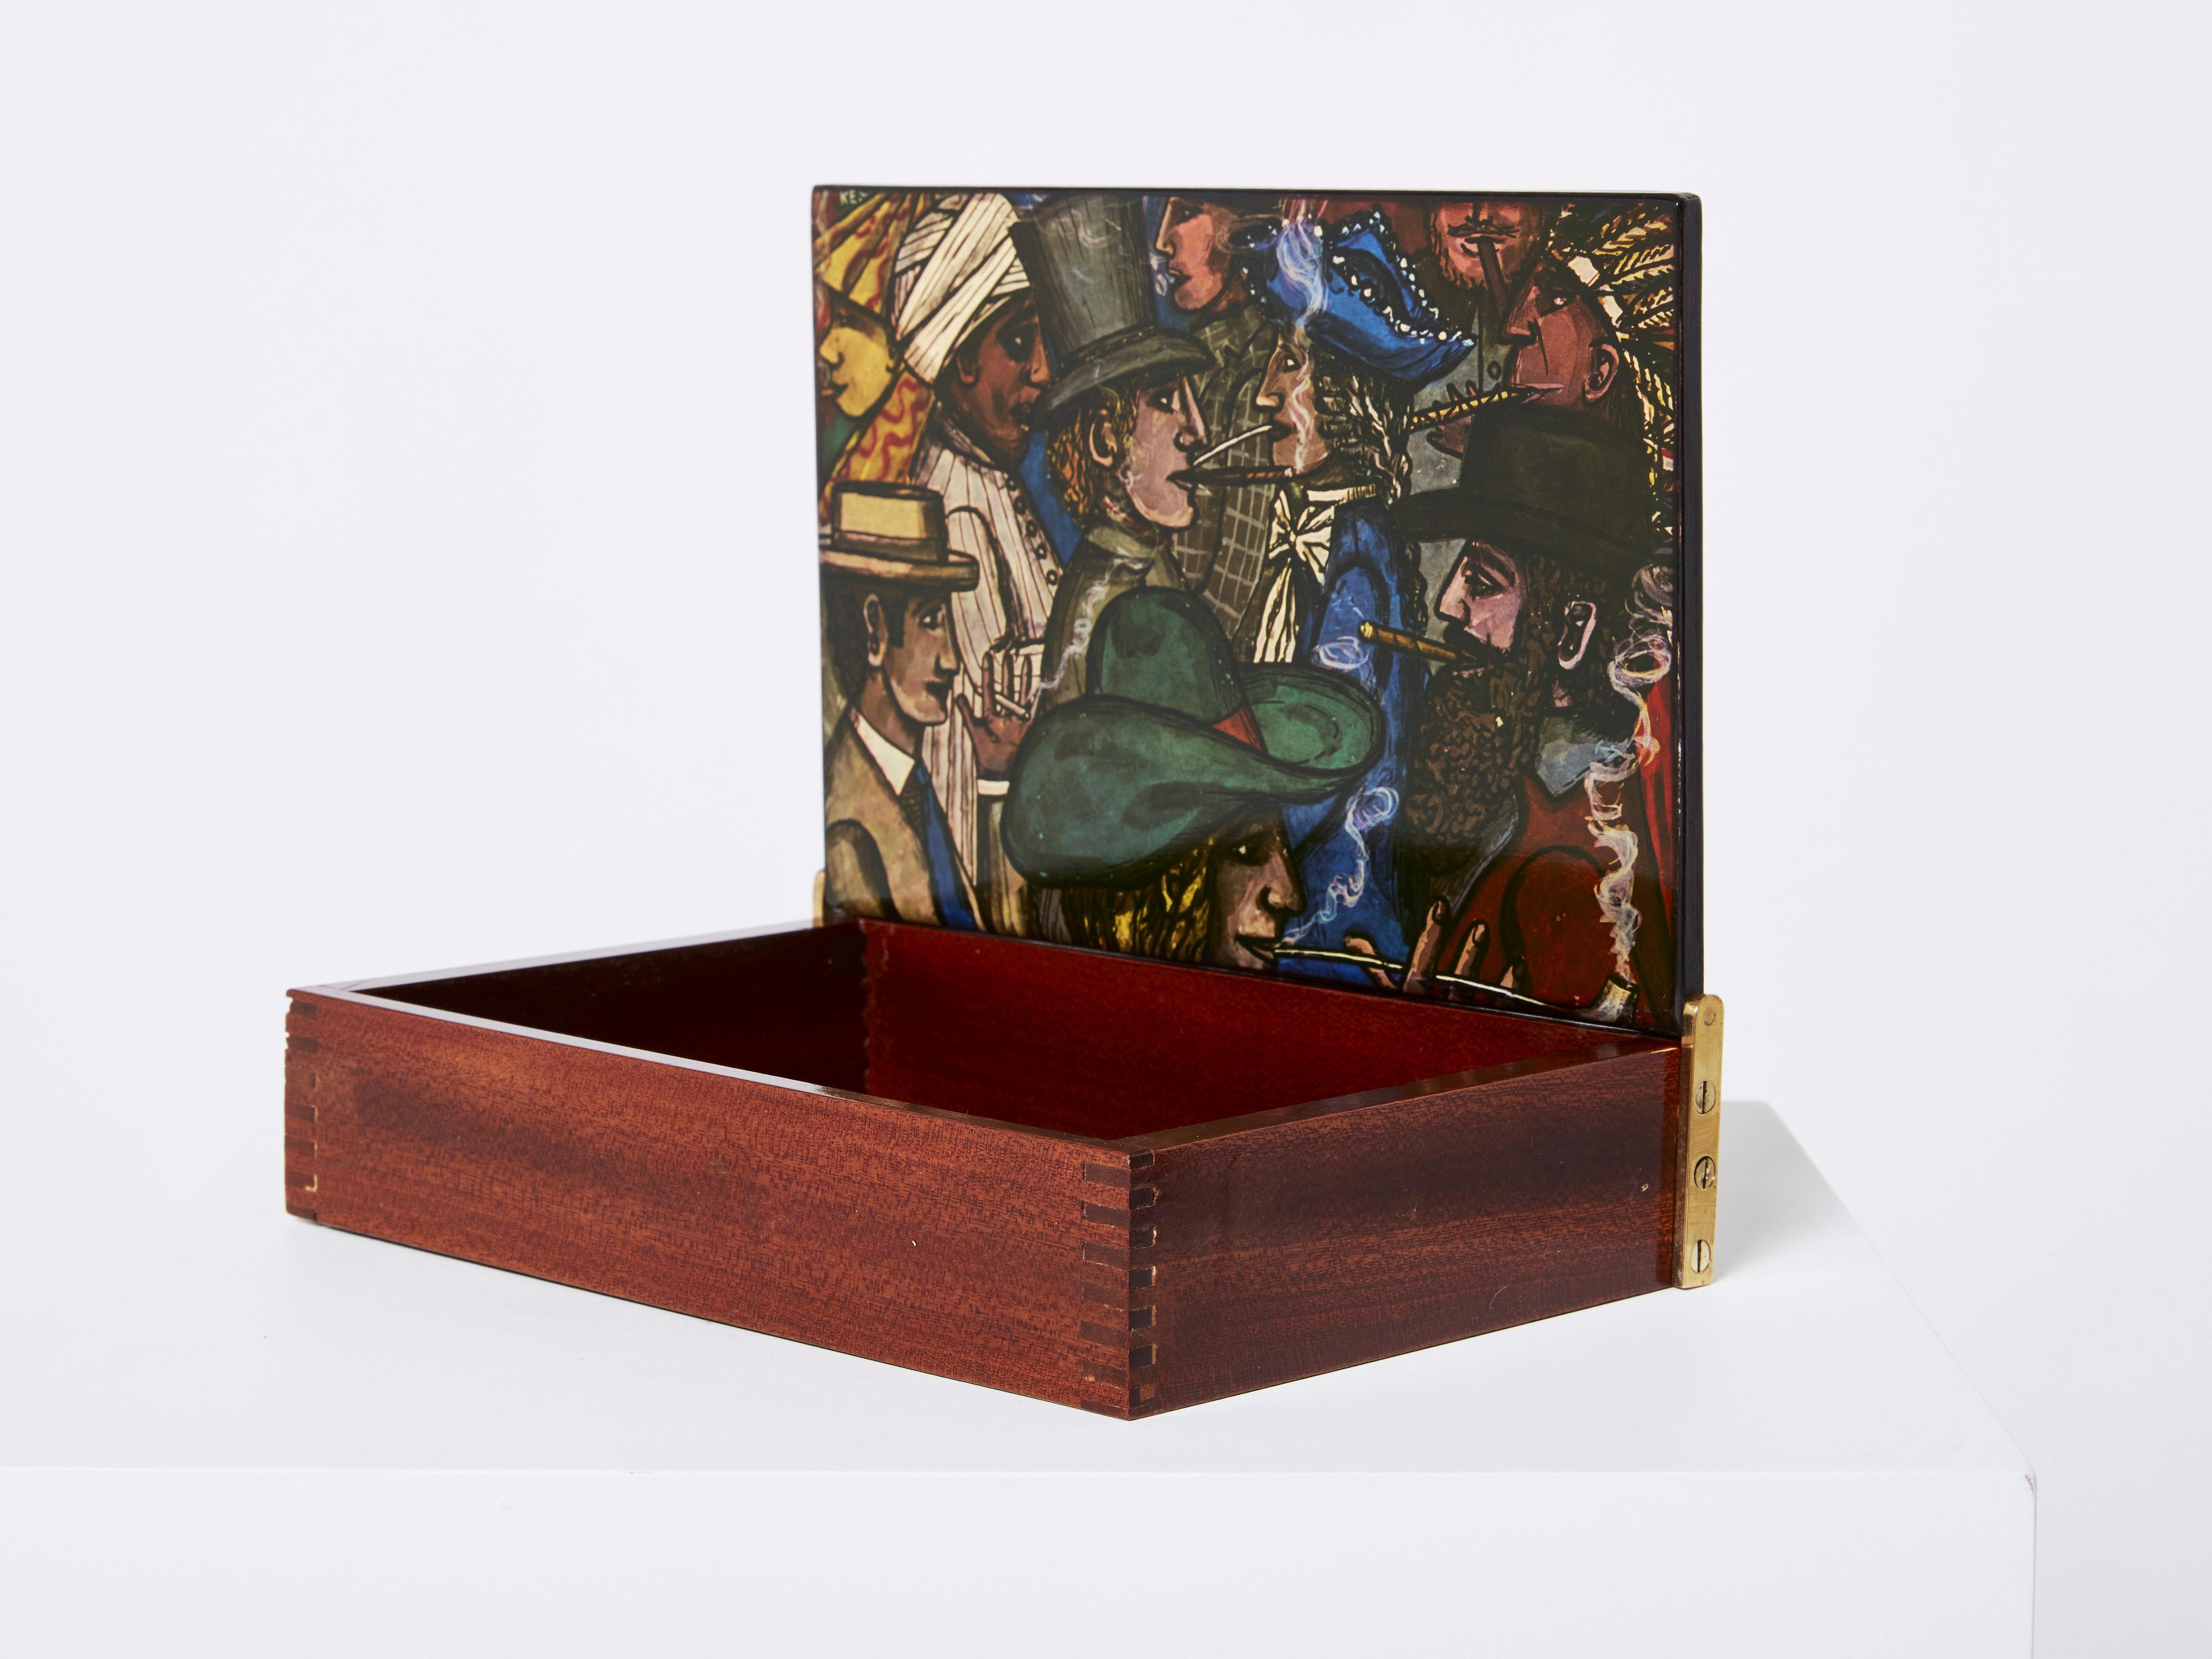 Beautiful Piero Fornasetti decorative box made in Italy in the 1950s. This box is carved from mahogany wood, with painted varnished wood on both sides of the top, and brass side hinges. A collectible piece, perfect as a gift, with a very nice